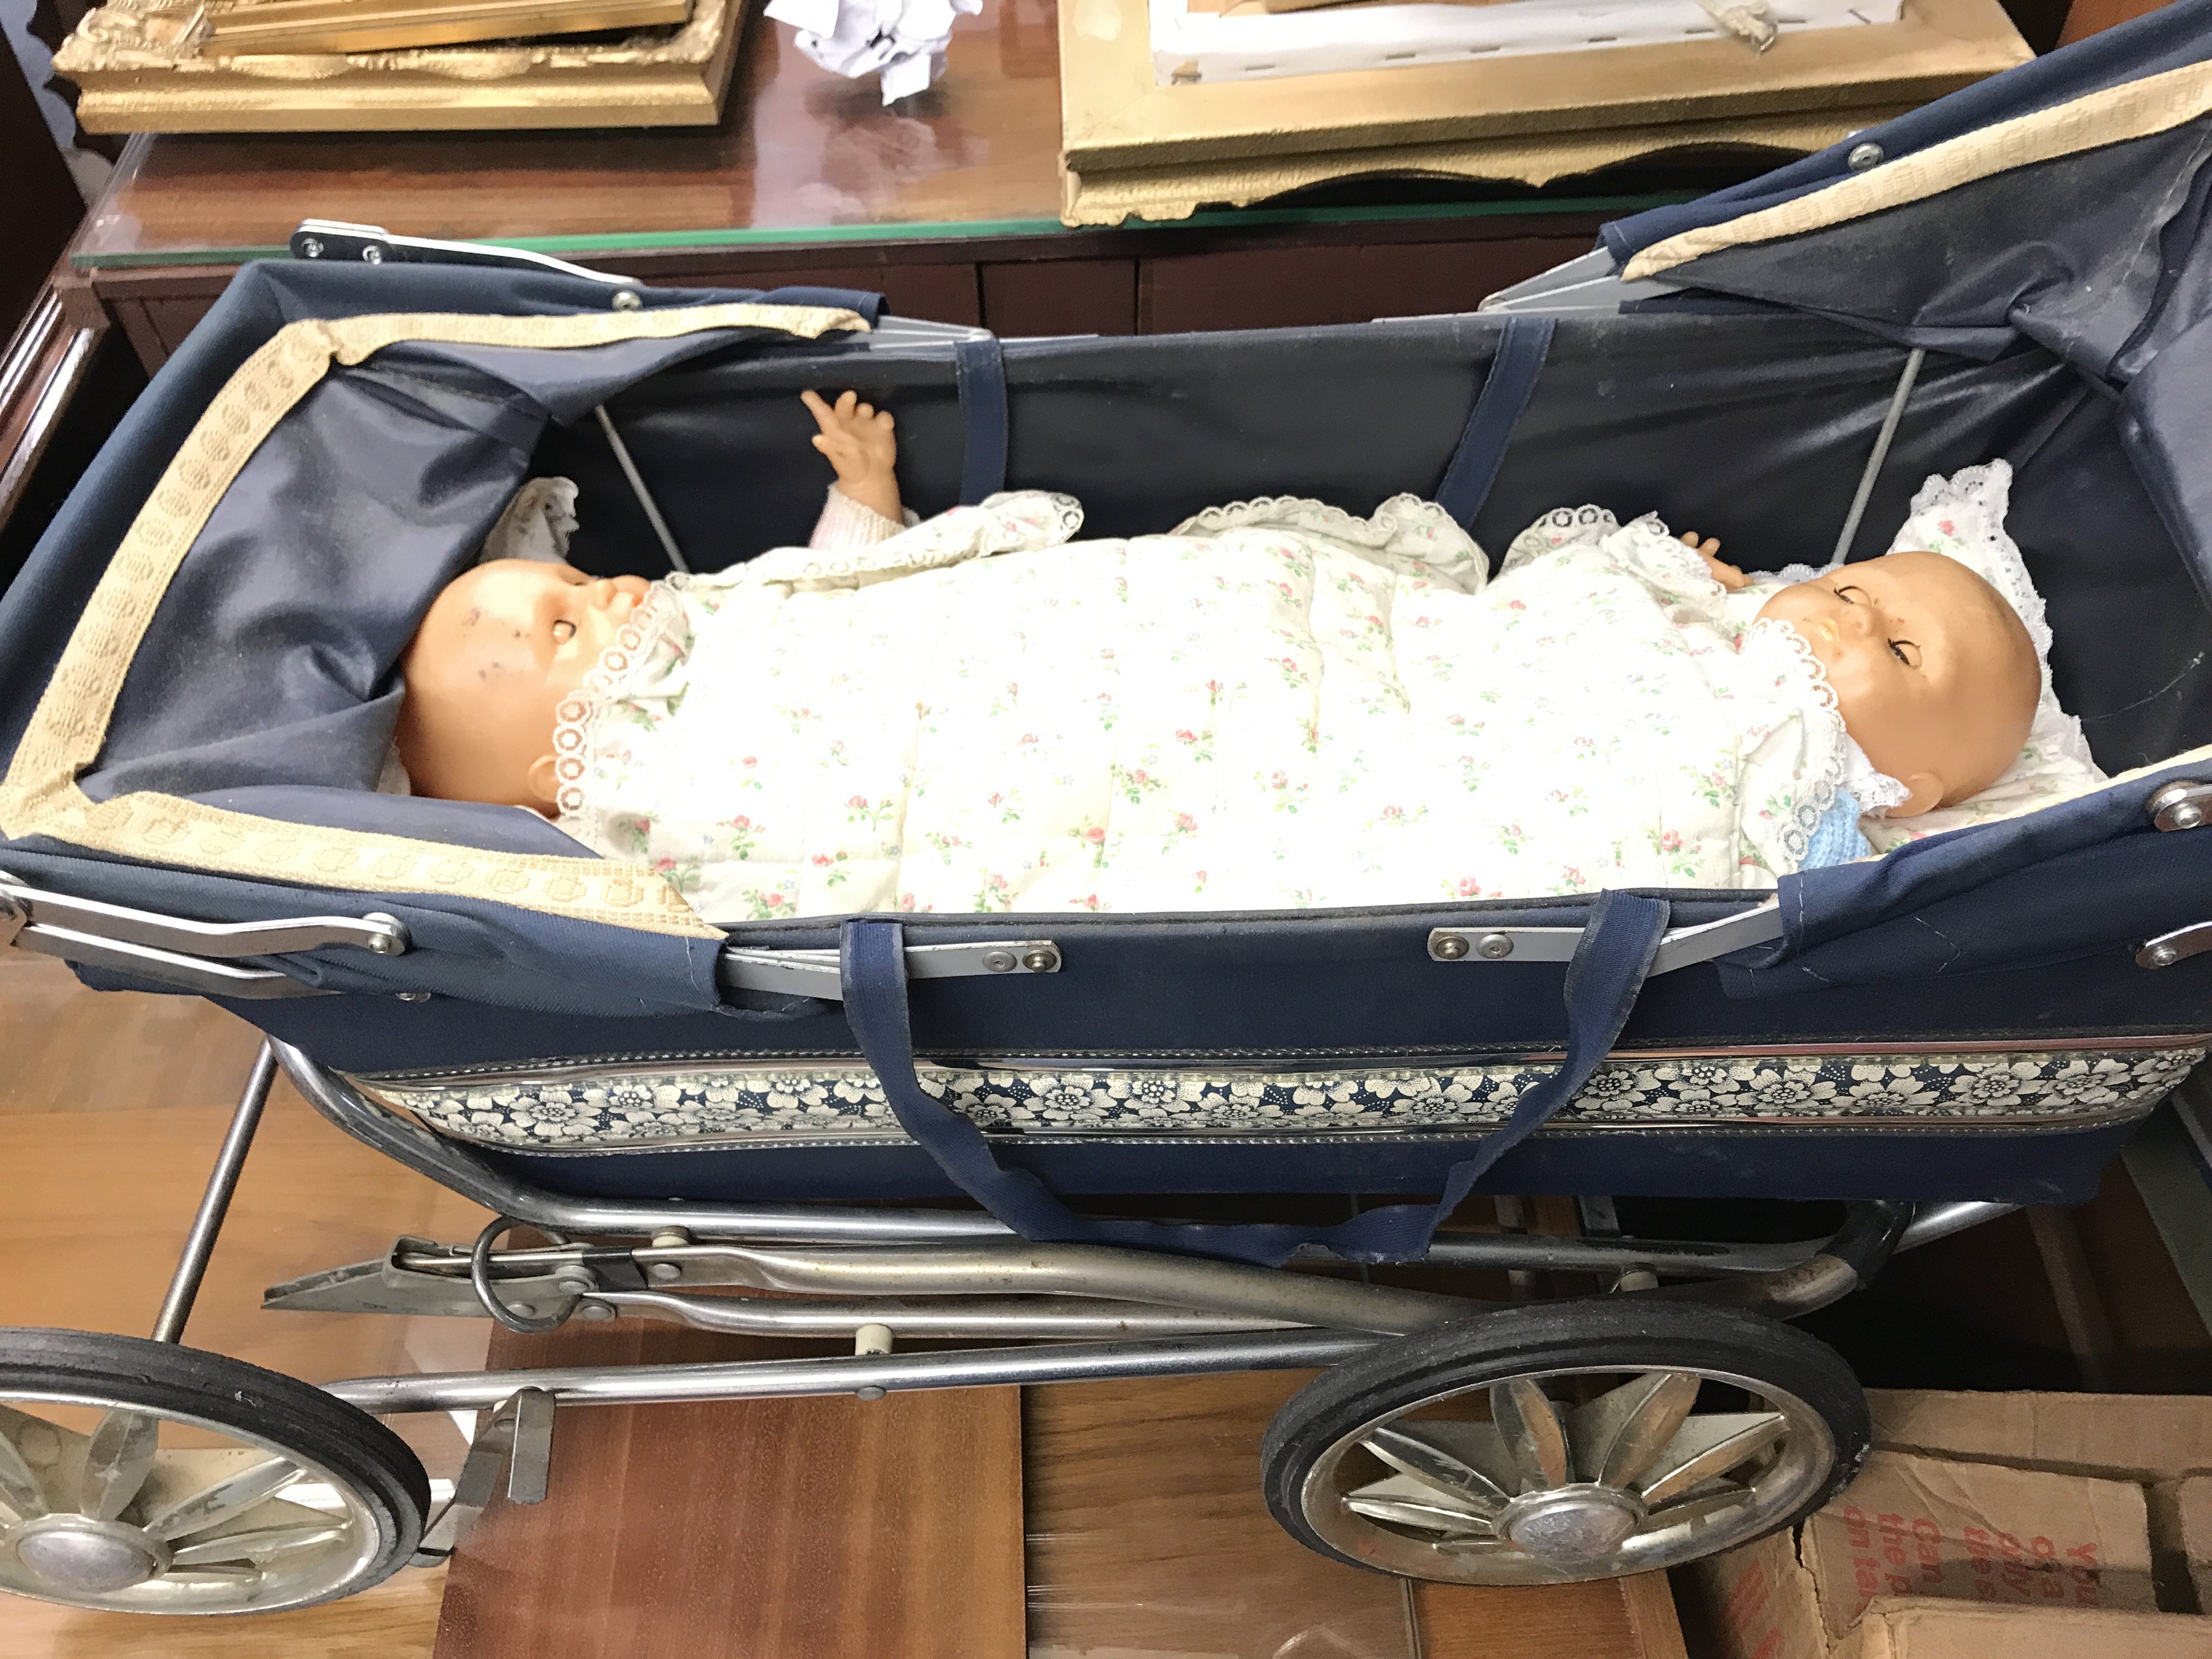 A vintage dolls pushchair and two dolls along with